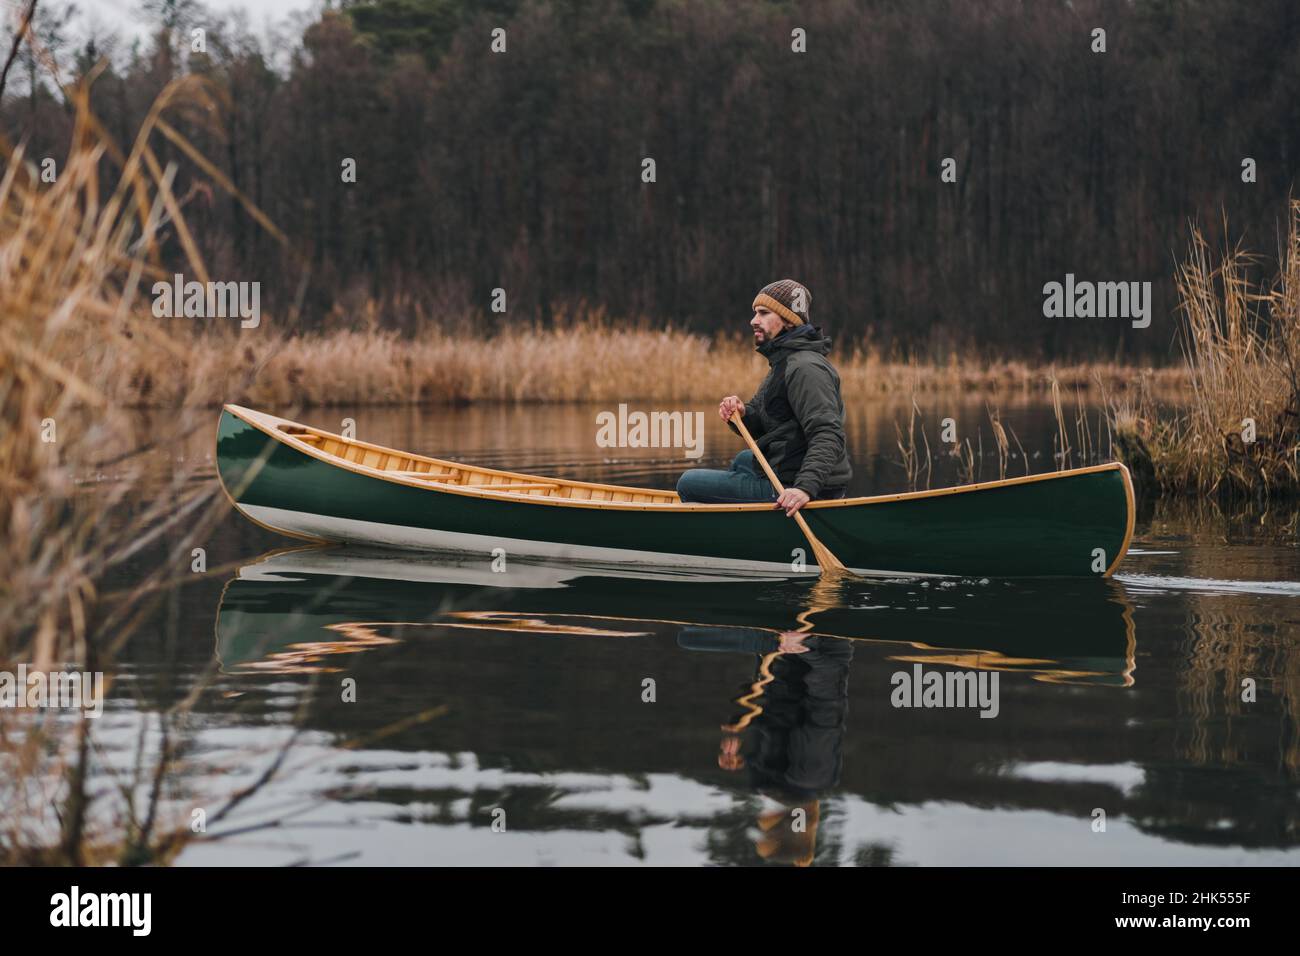 Man paddling a beautiful green canoe on the pond, calm late autumn nature. Active lifestyle, a person enjoying tranquil early spring scenery on the wa Stock Photo